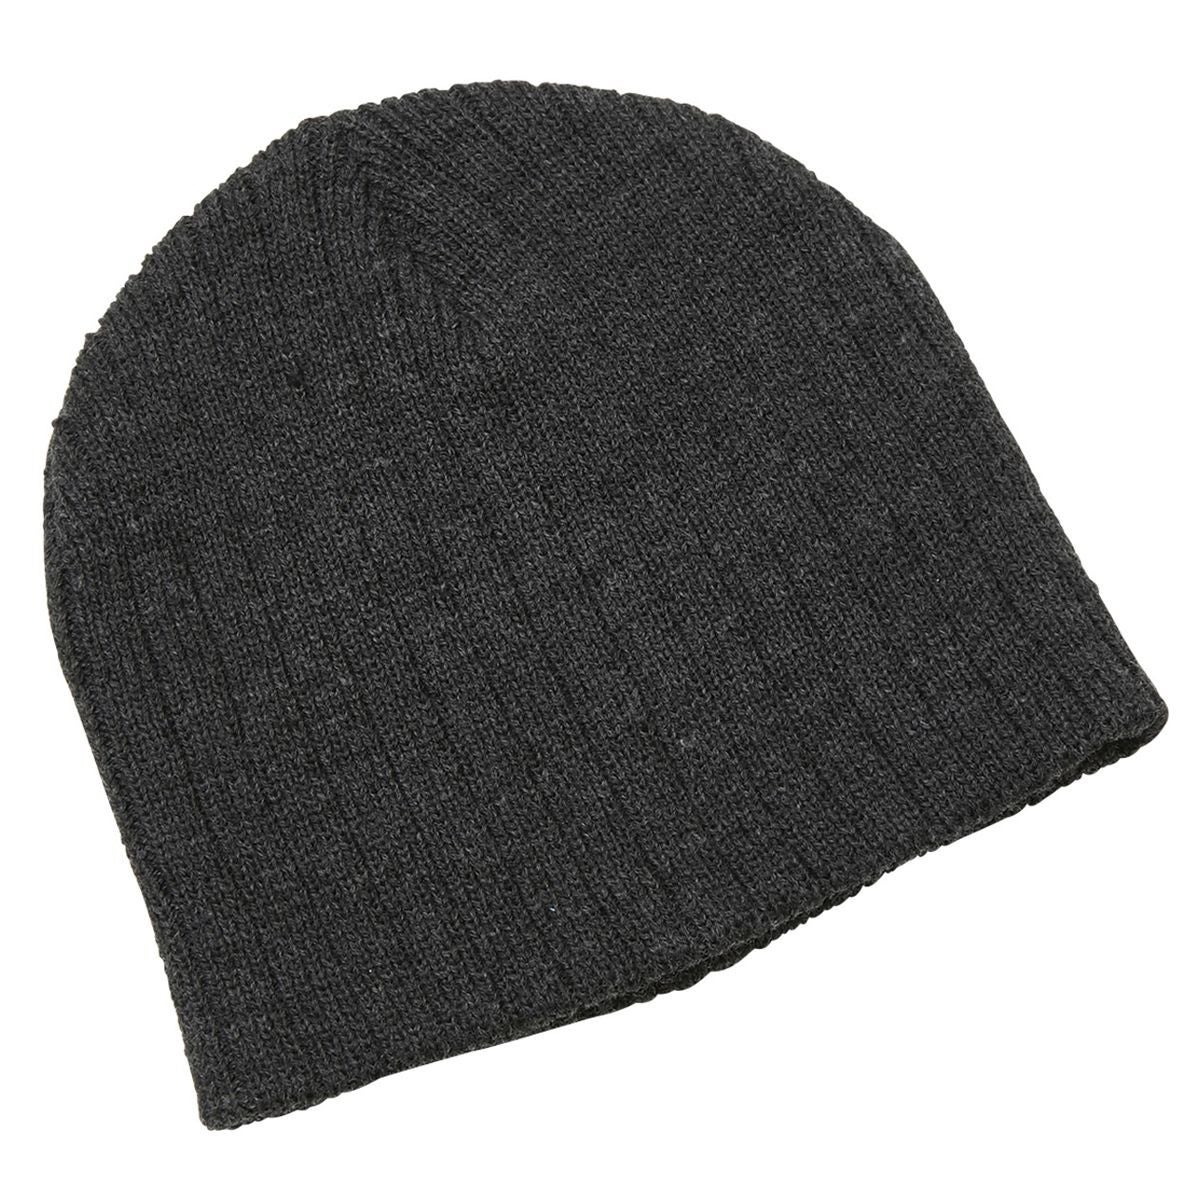 Heather Cable Knit Beanie